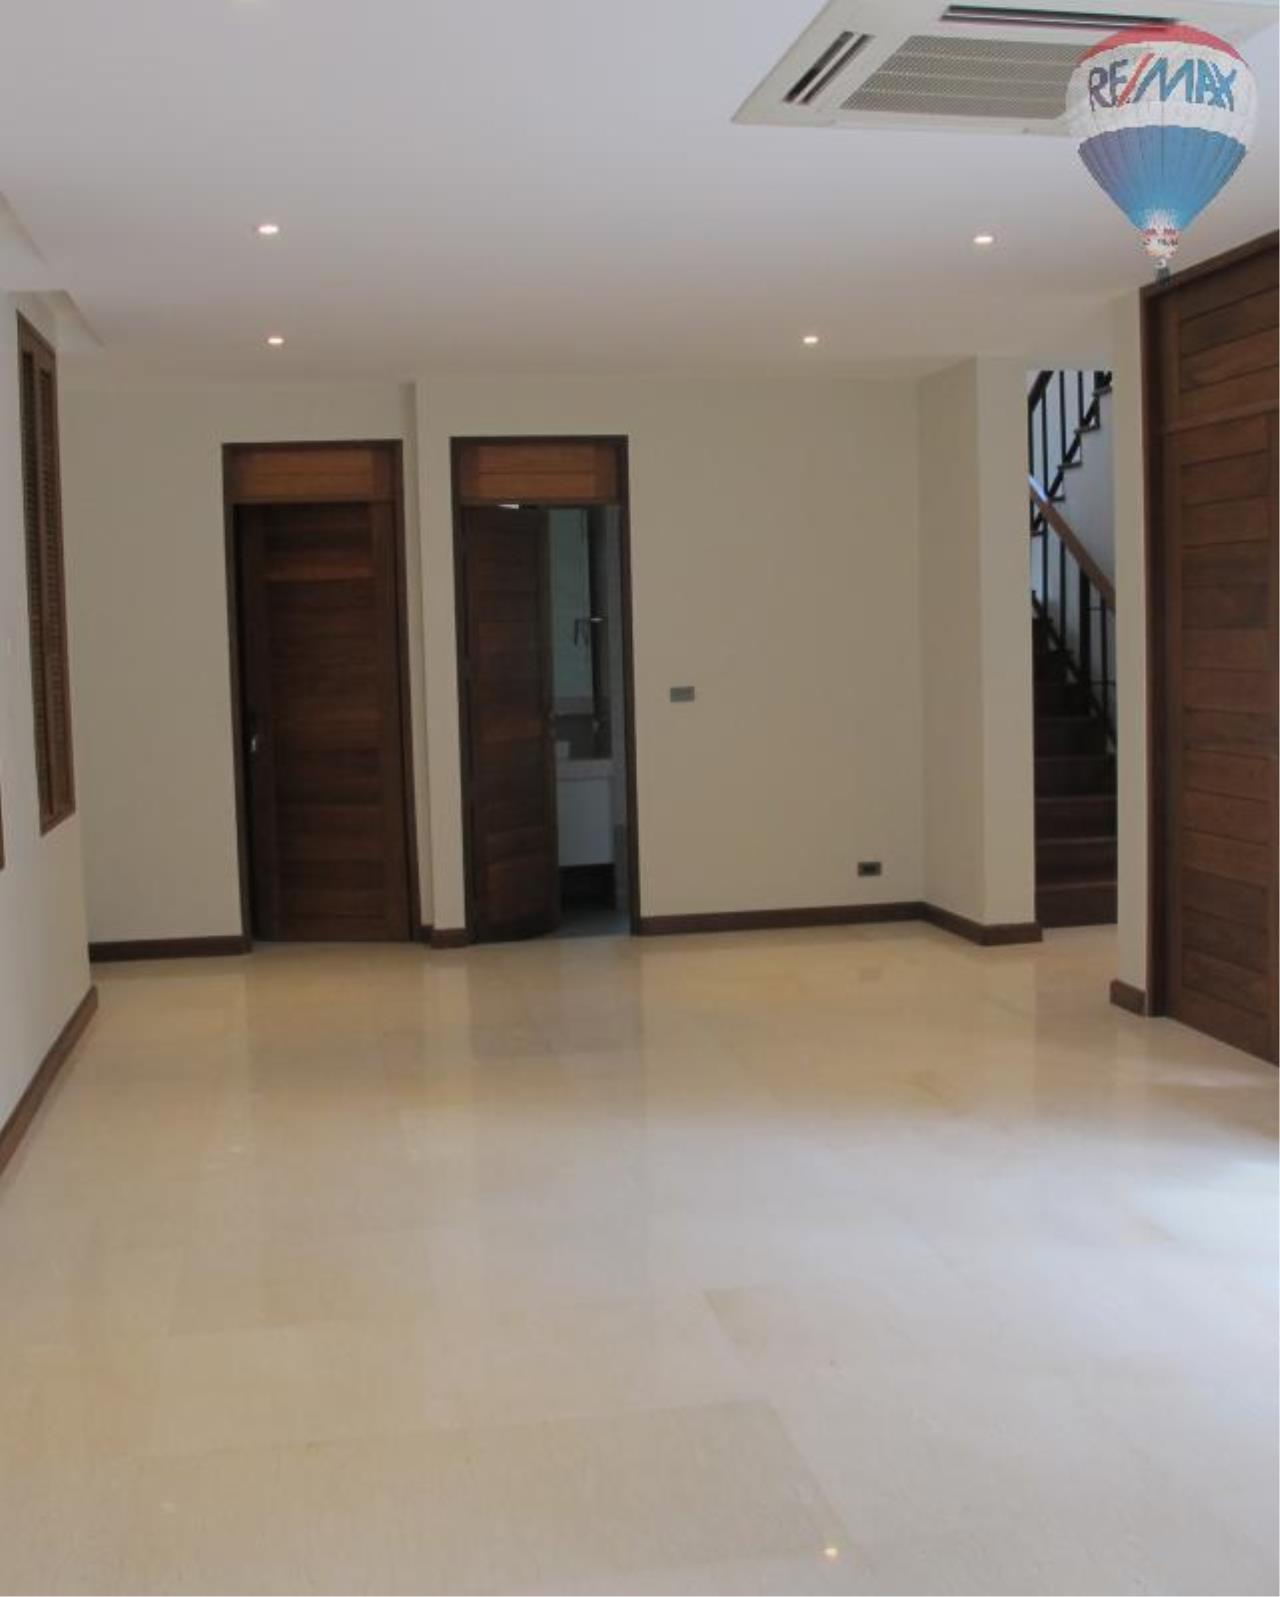 RE/MAX Properties Agency's 4 Bedroom House 530 sq.m. for Rent in Sukhumvit 24 14